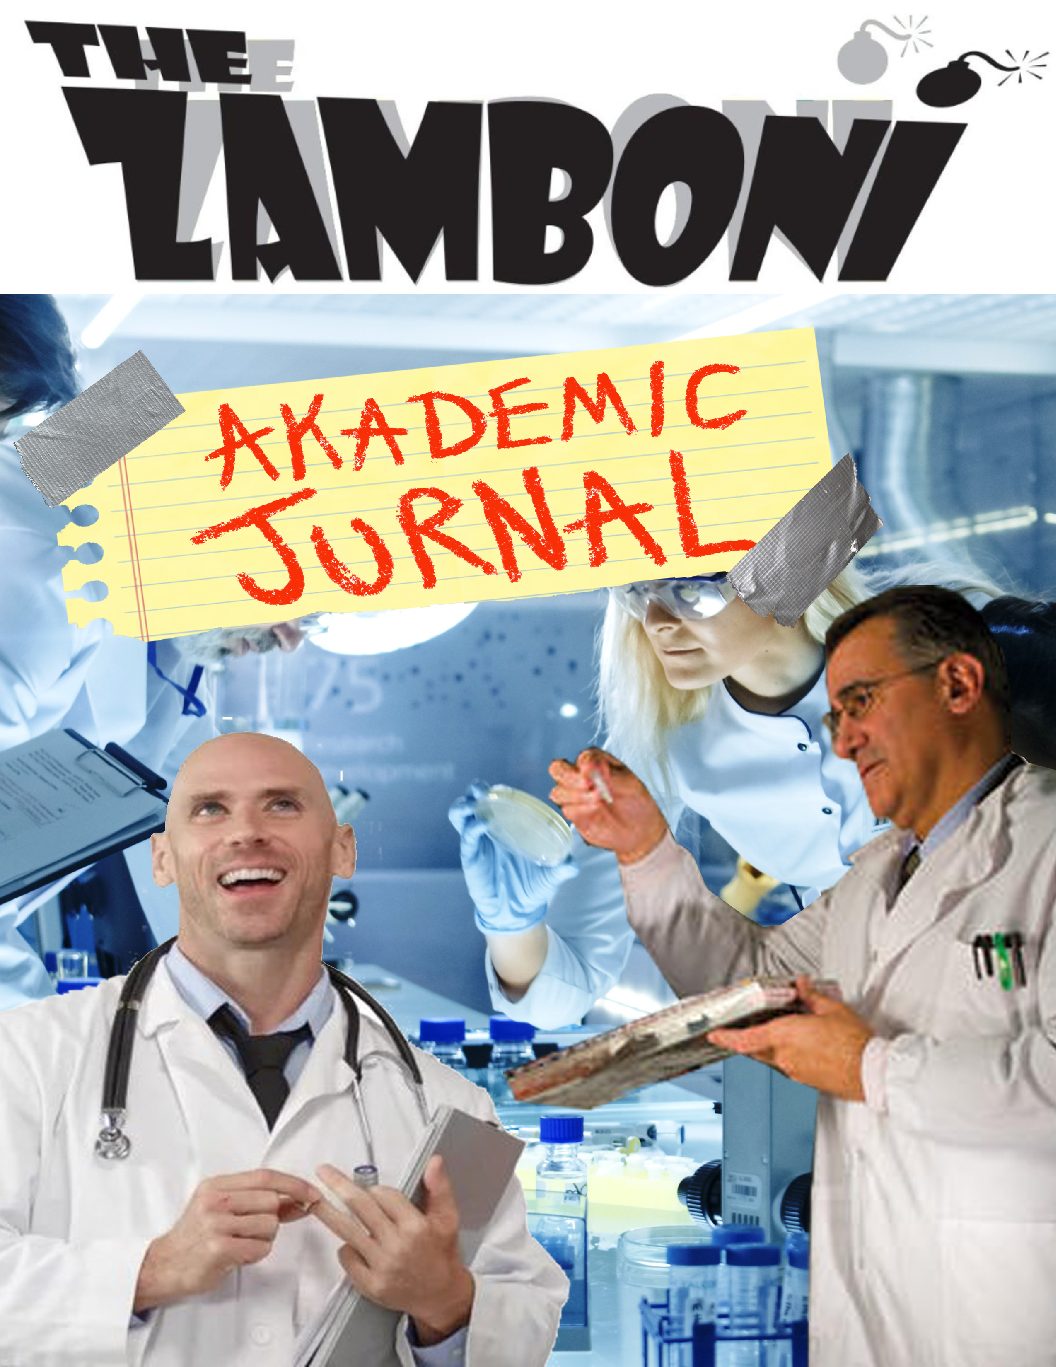 The Academic Journal Issue